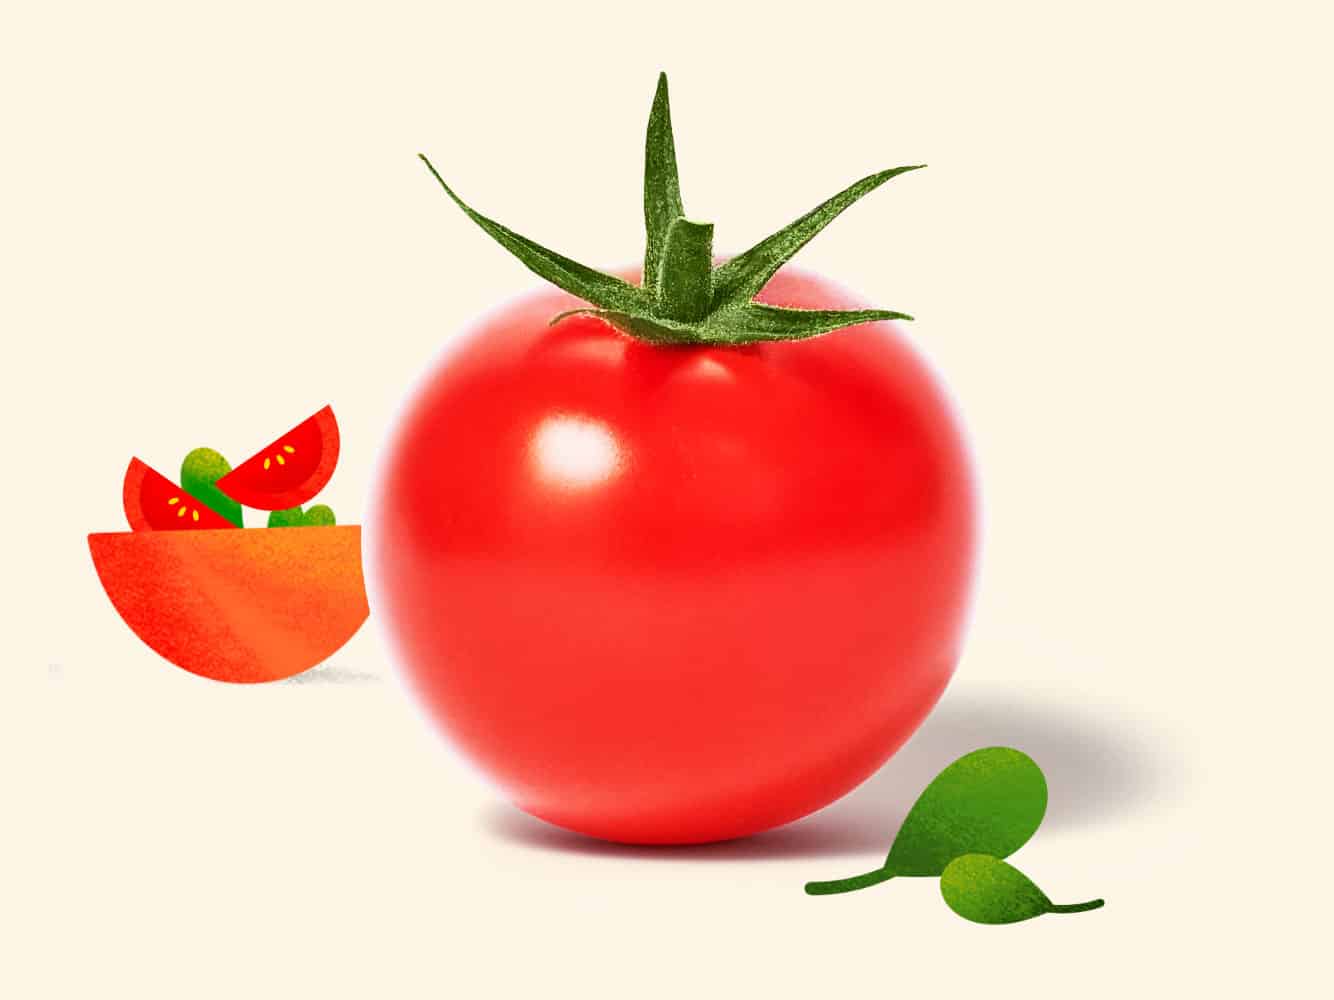 Image of cocktail tomato